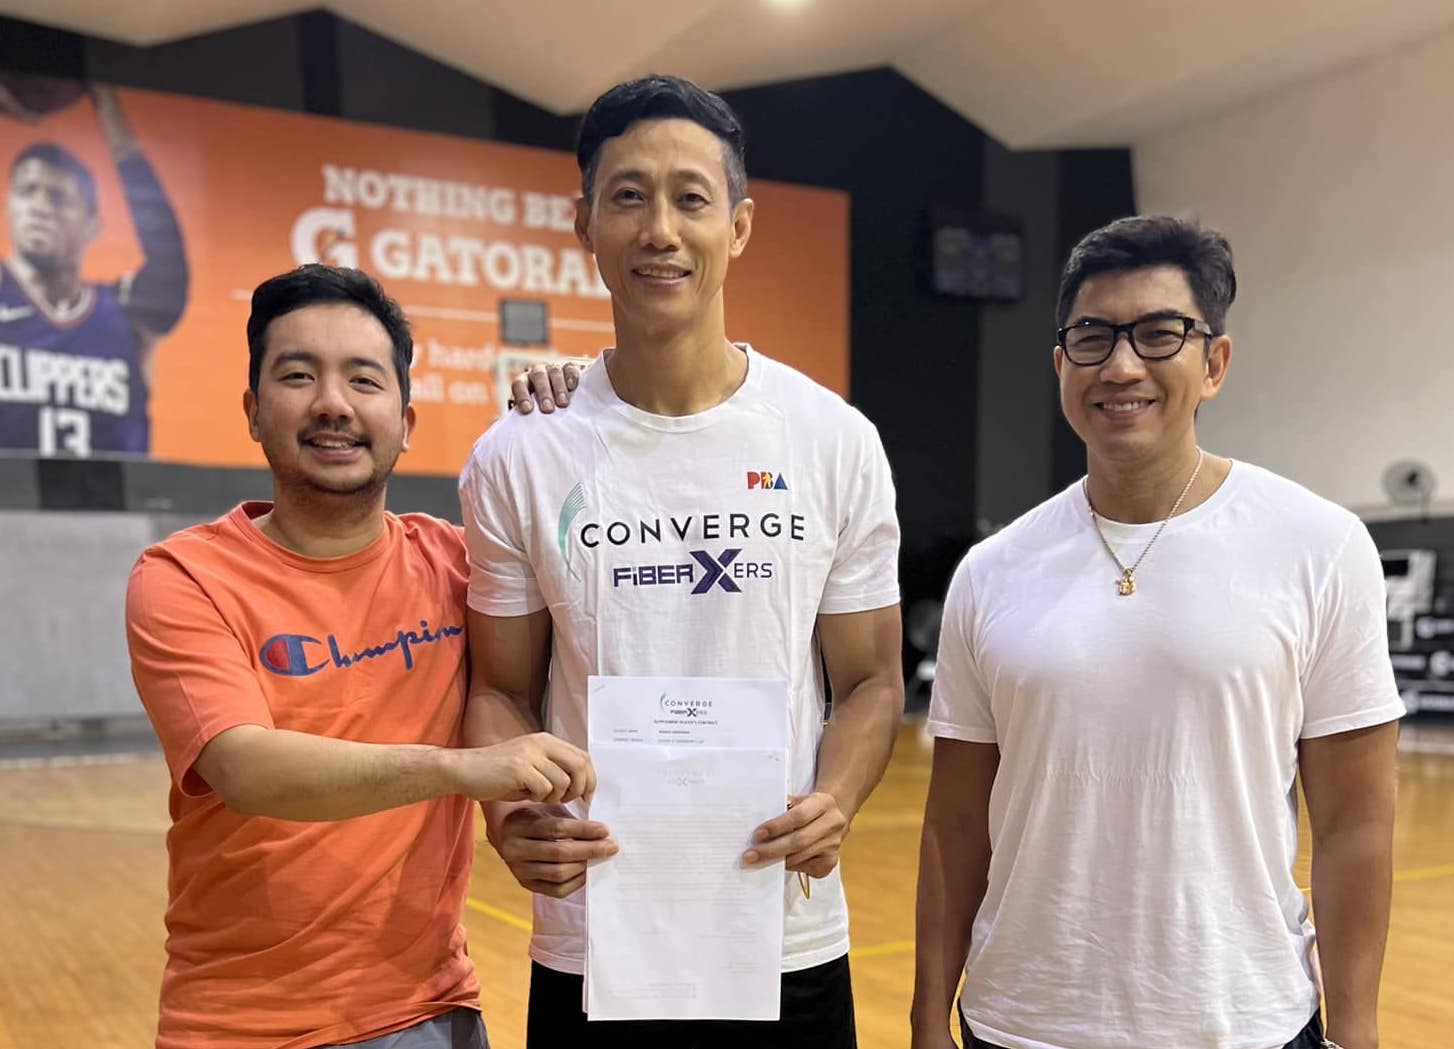 PBA great Danny Ildefonso will suit up for the Converge FiberXers in the PBA. –ALDIN AYO FACEBOOK